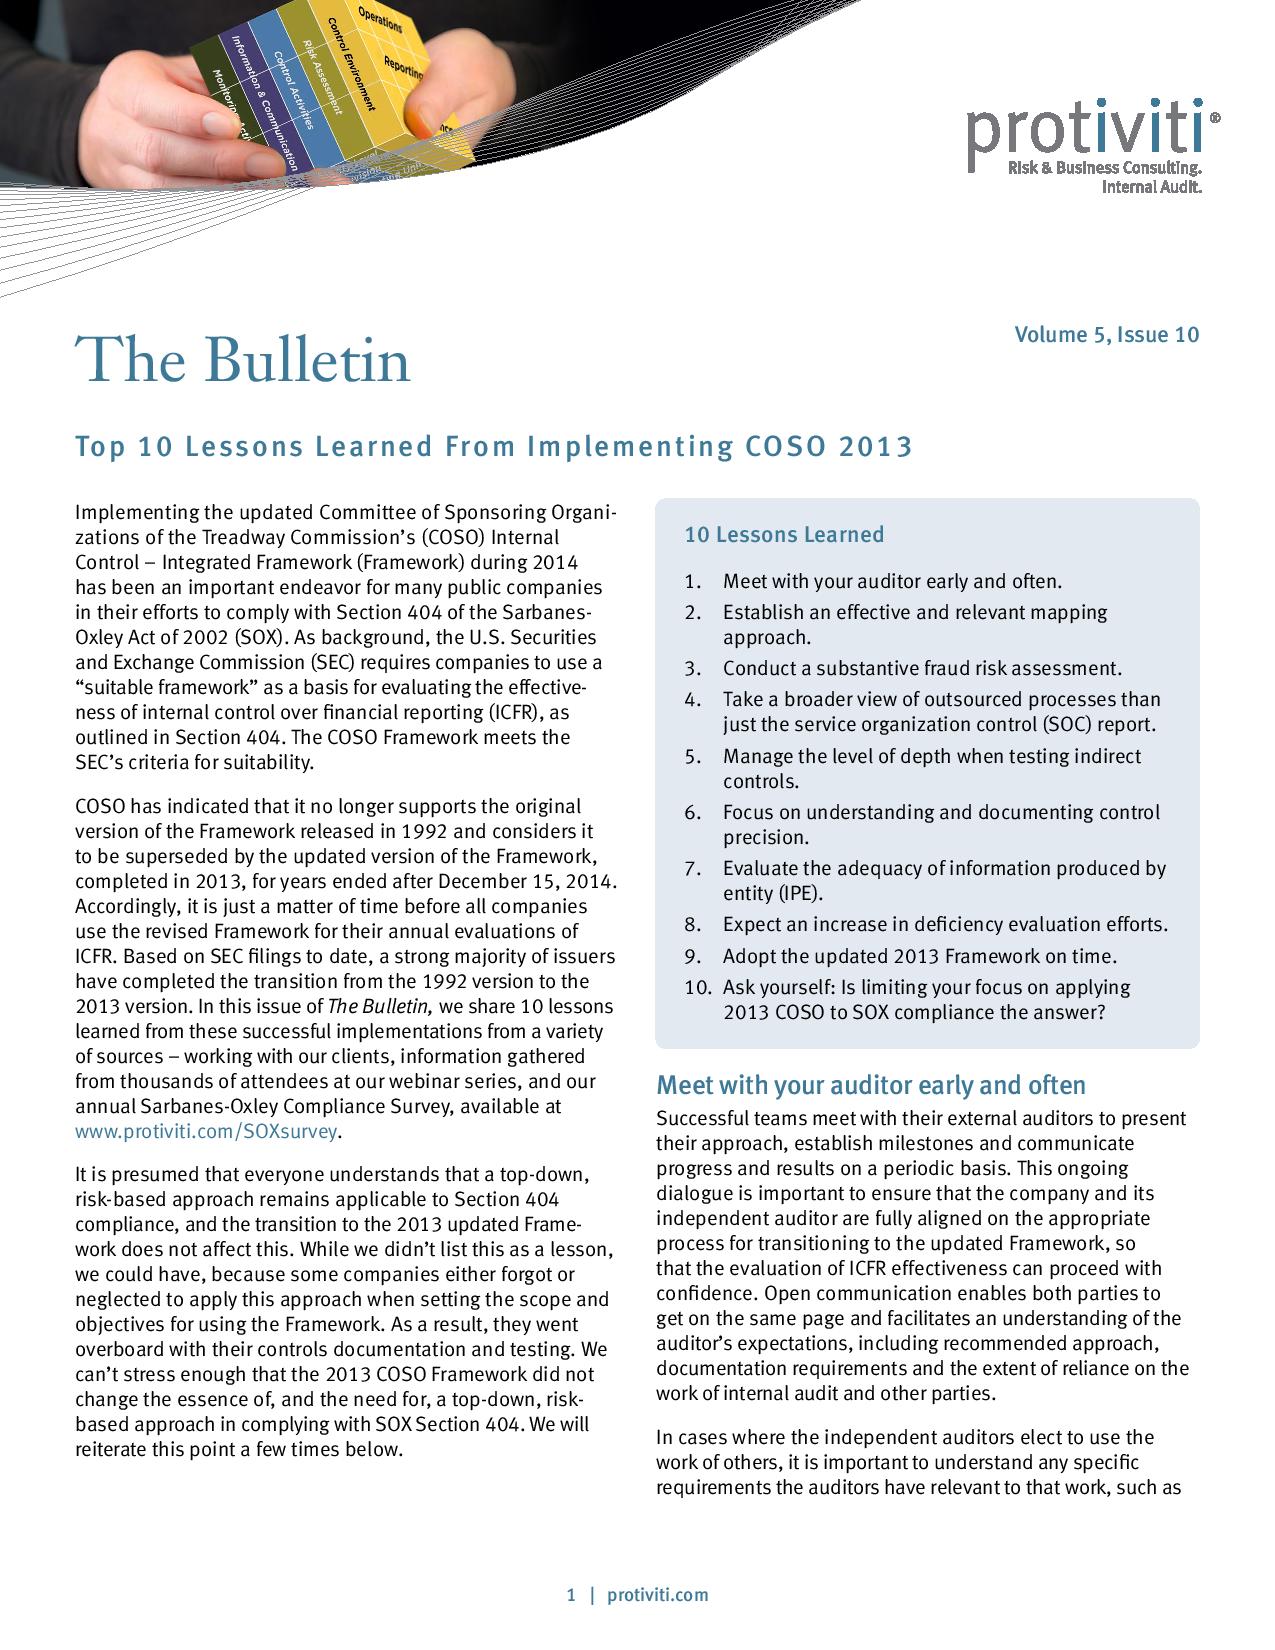 Top 10 Lessons Learned From Implementing COSO 2013